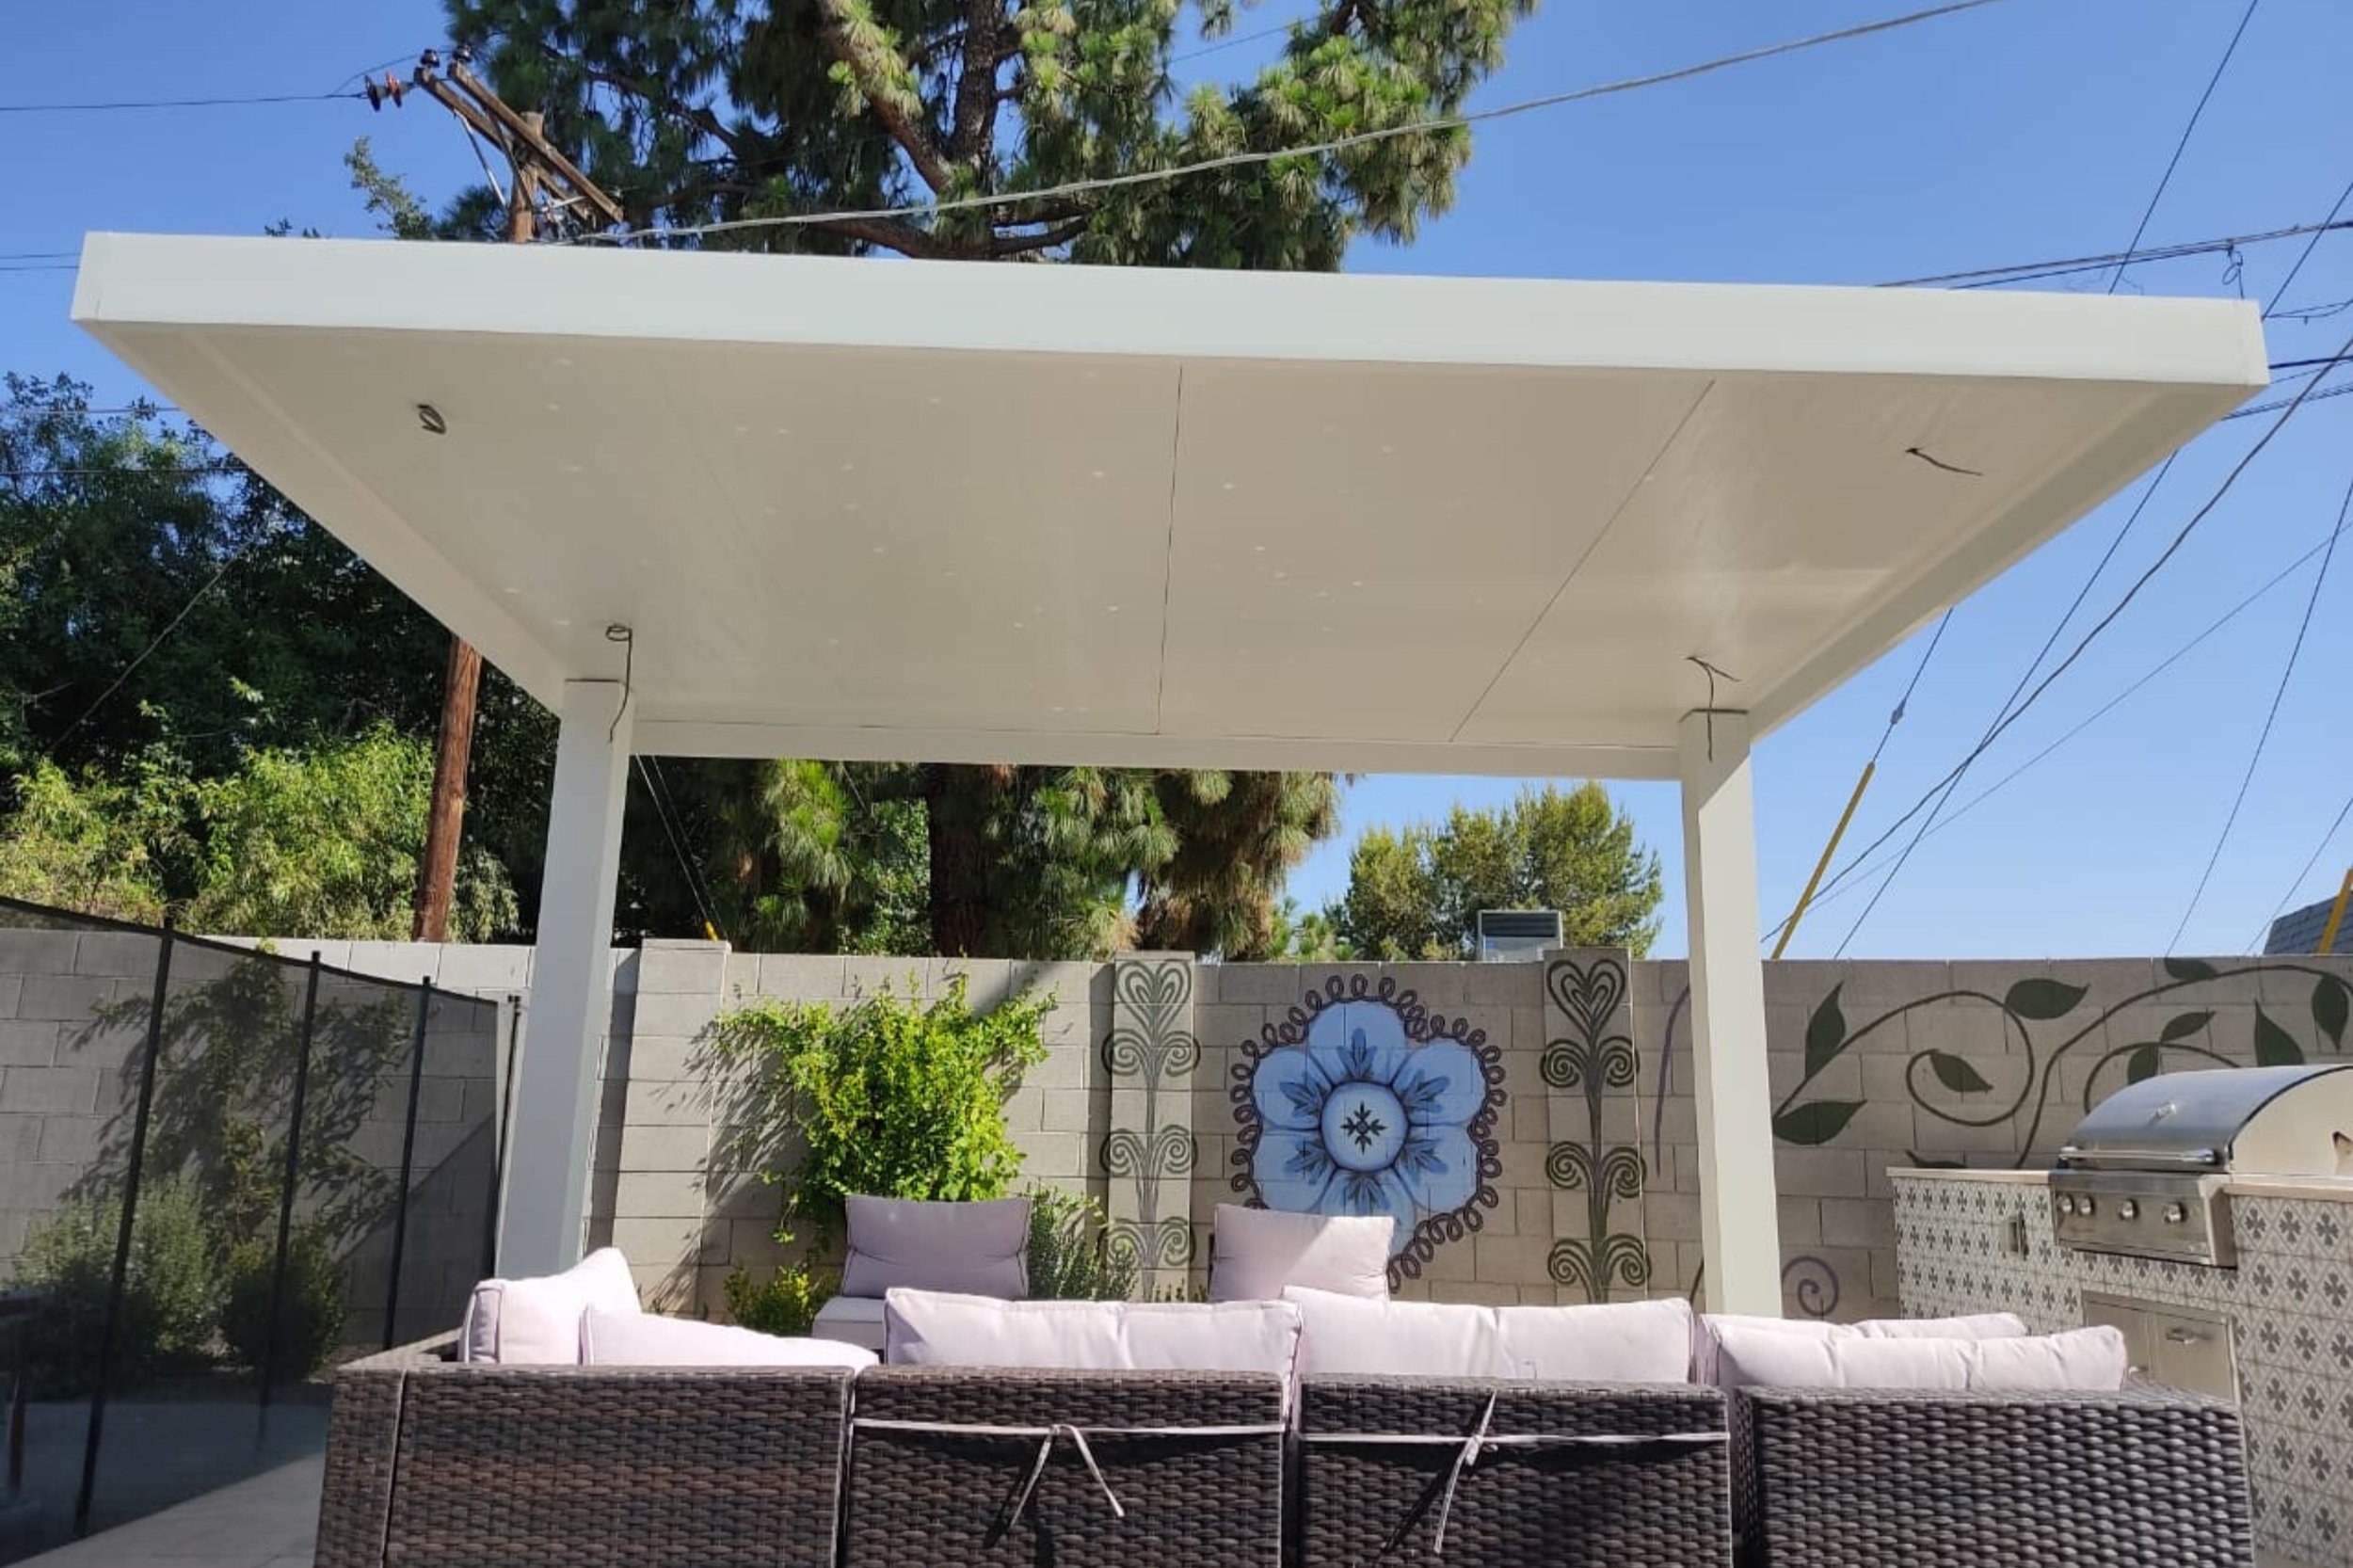 4K Aluminum Patio Cover Installation Services by Outshine Patio Cover in Phoenix